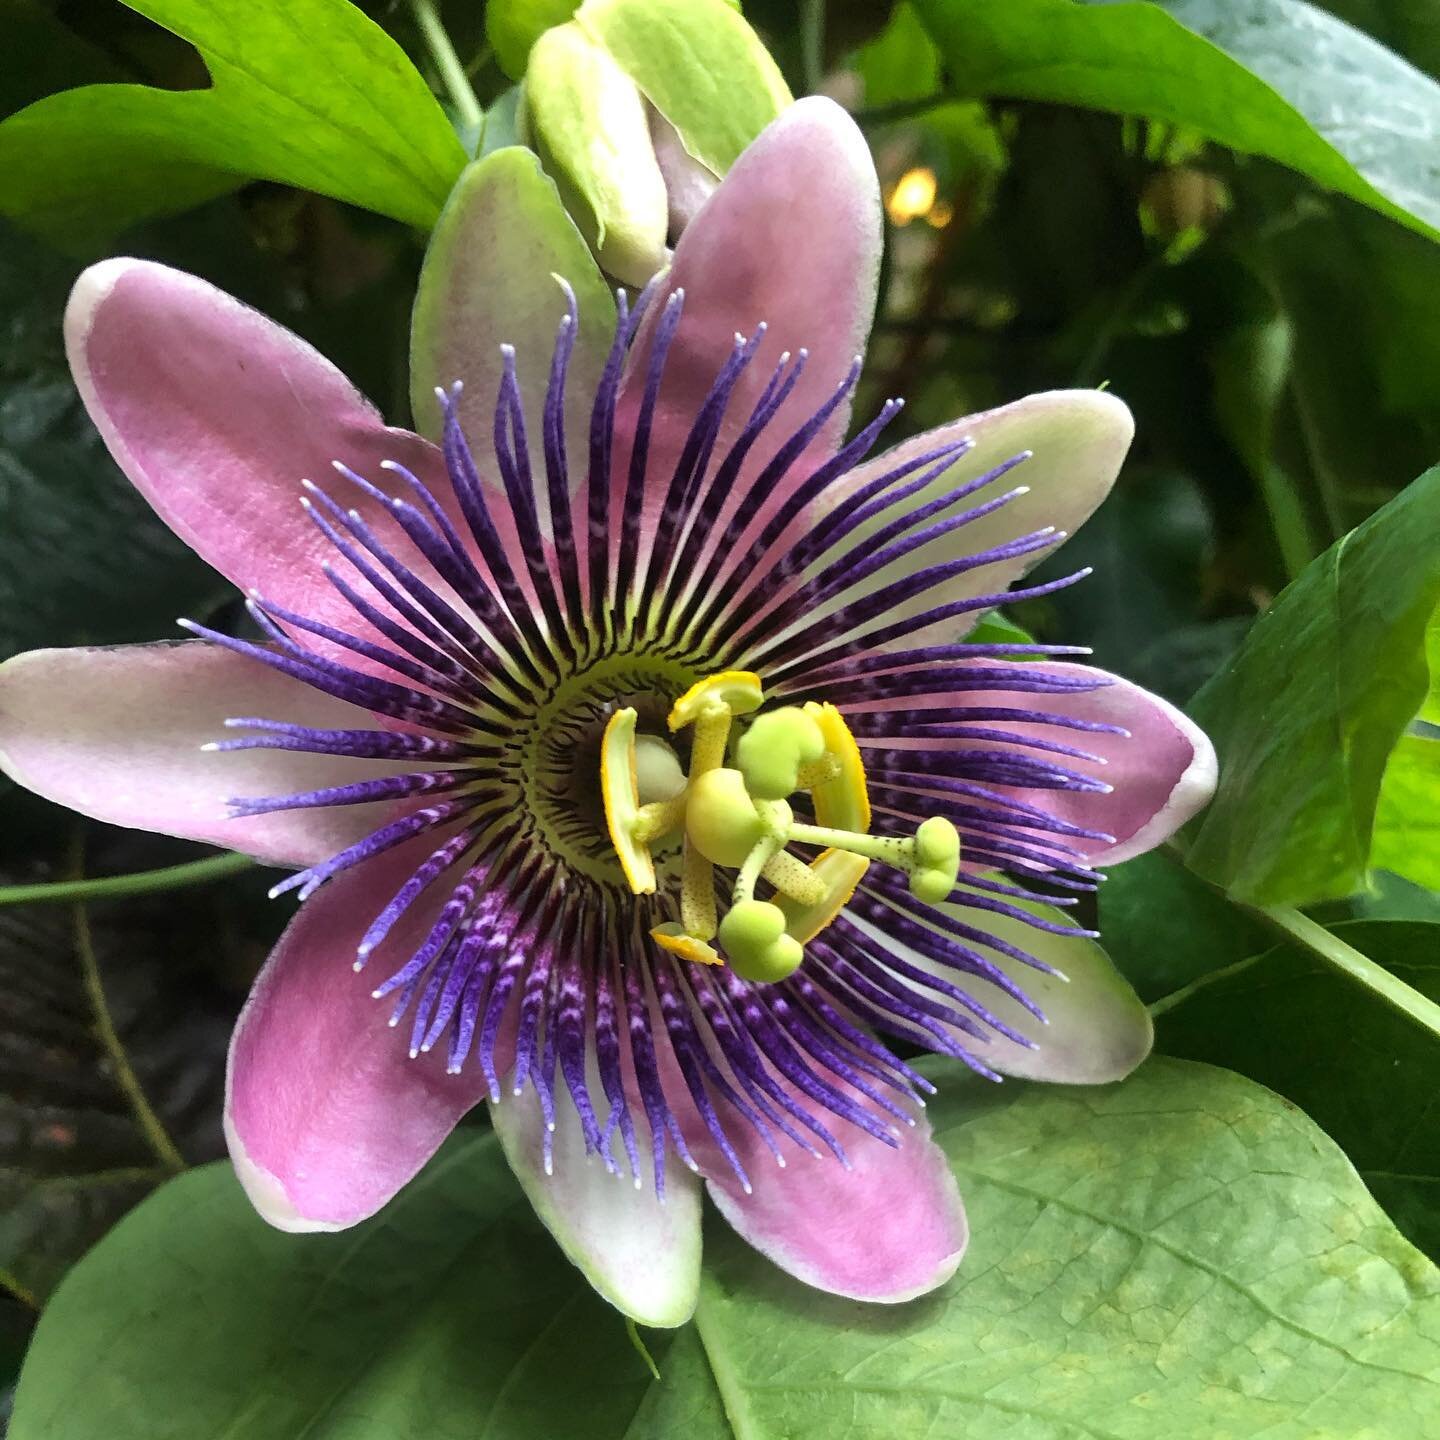 Did we have a photoshoot with our client&rsquo;s blooming passion flower? You bet we did. How could we not when they only bloom for 24 hours?!